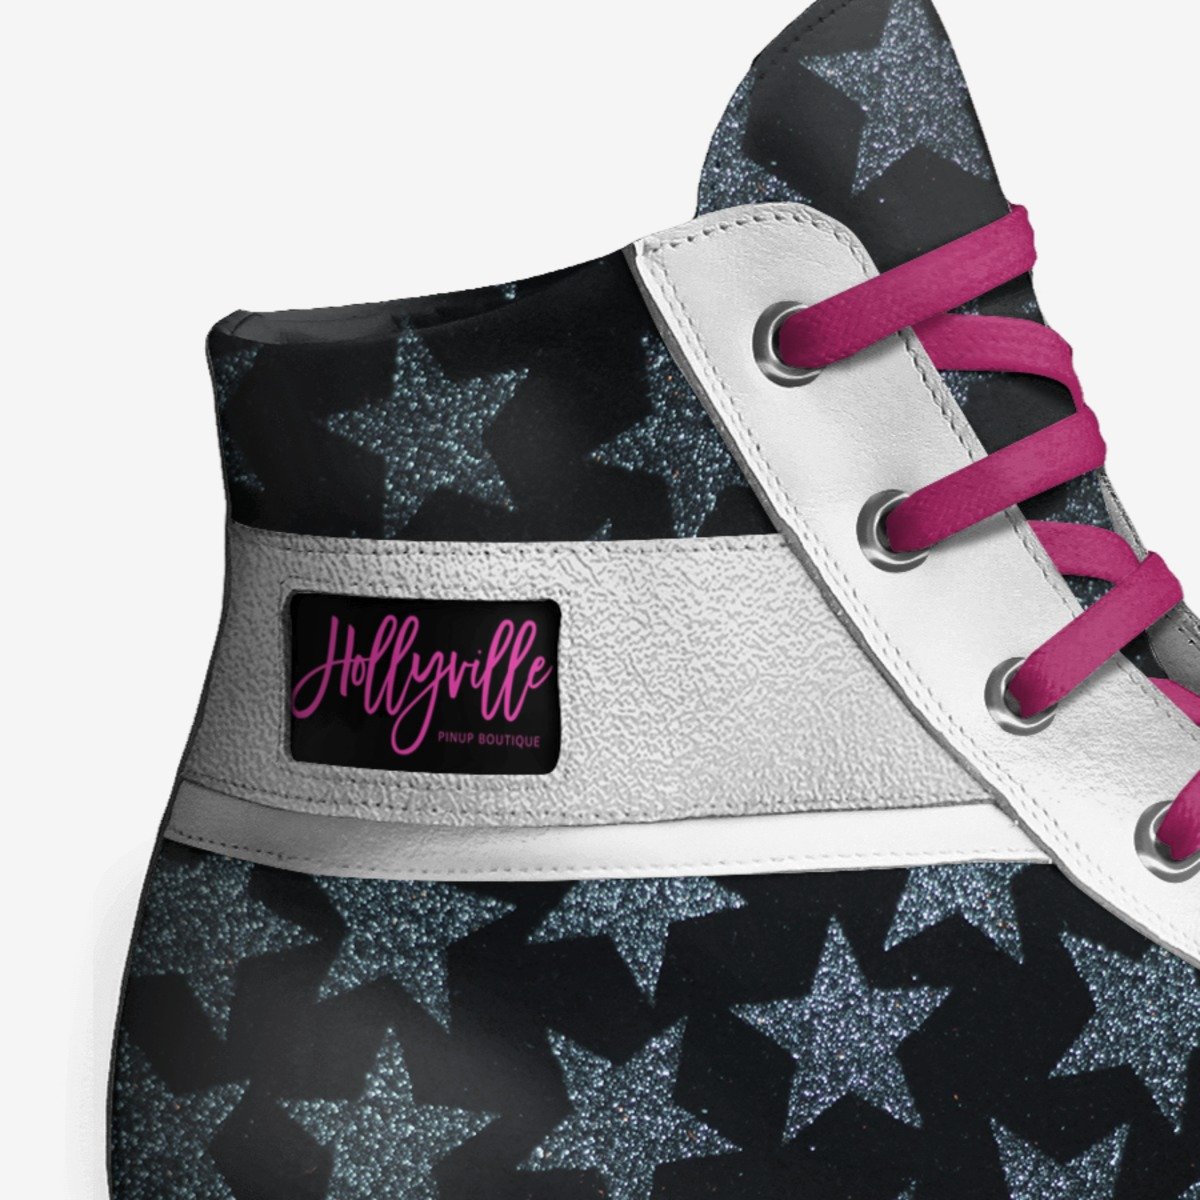 Hollyicious Classic High Top Sneakers by Hollyville